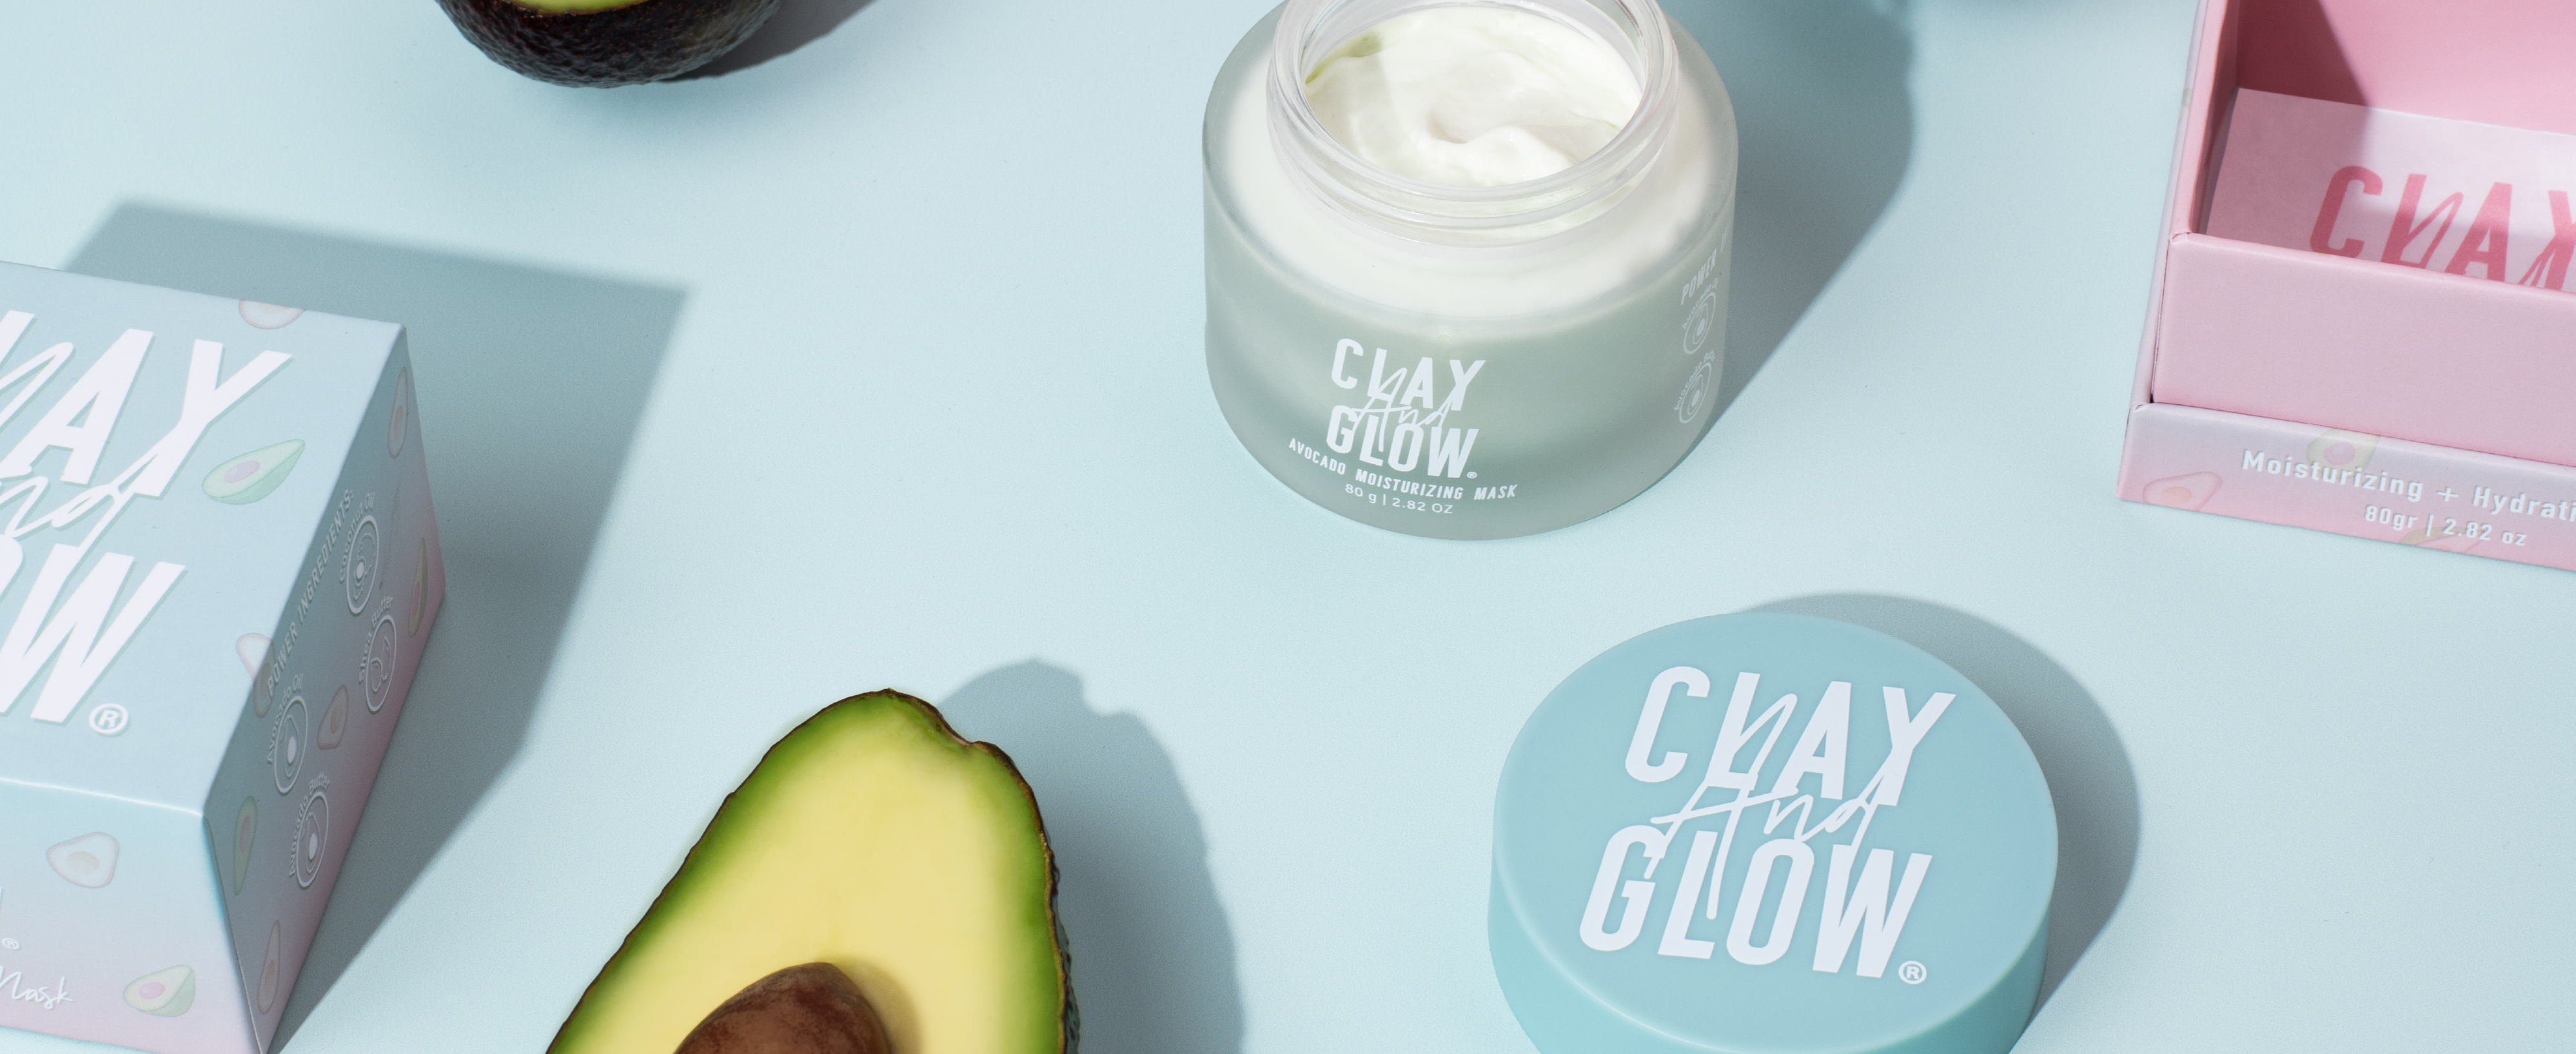 What does avocado do in skincare?